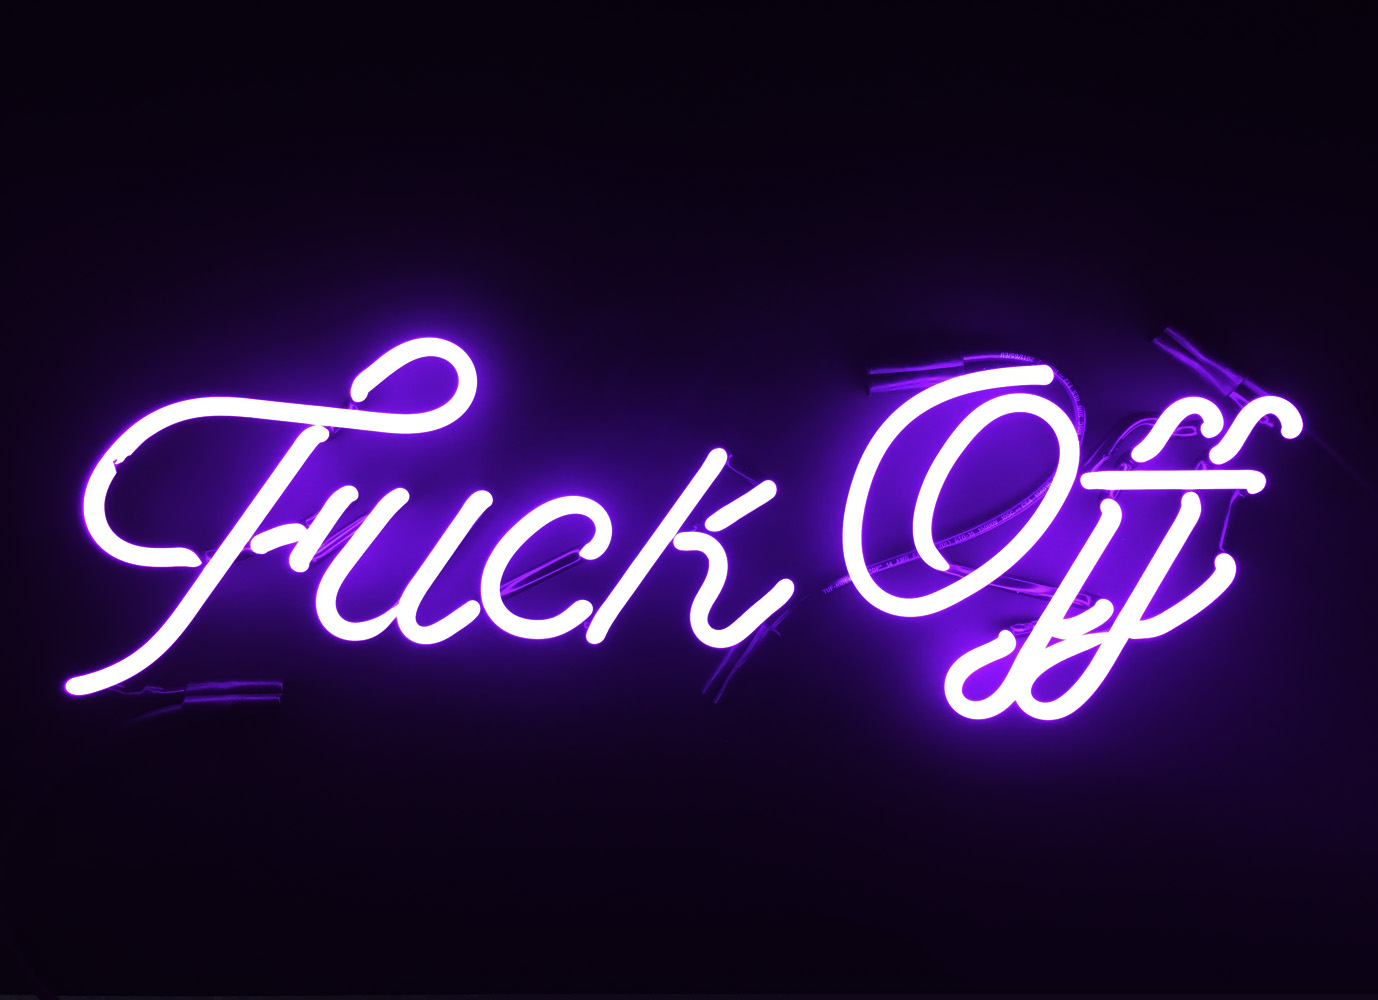 Indira-Cesarine-FUCK-OFF-violet-neon-2-THE-UNTITLED-SPACE-UPRISE-ANGRY-WOMEN-EXHIBIT-lowres-copy-2.jpg